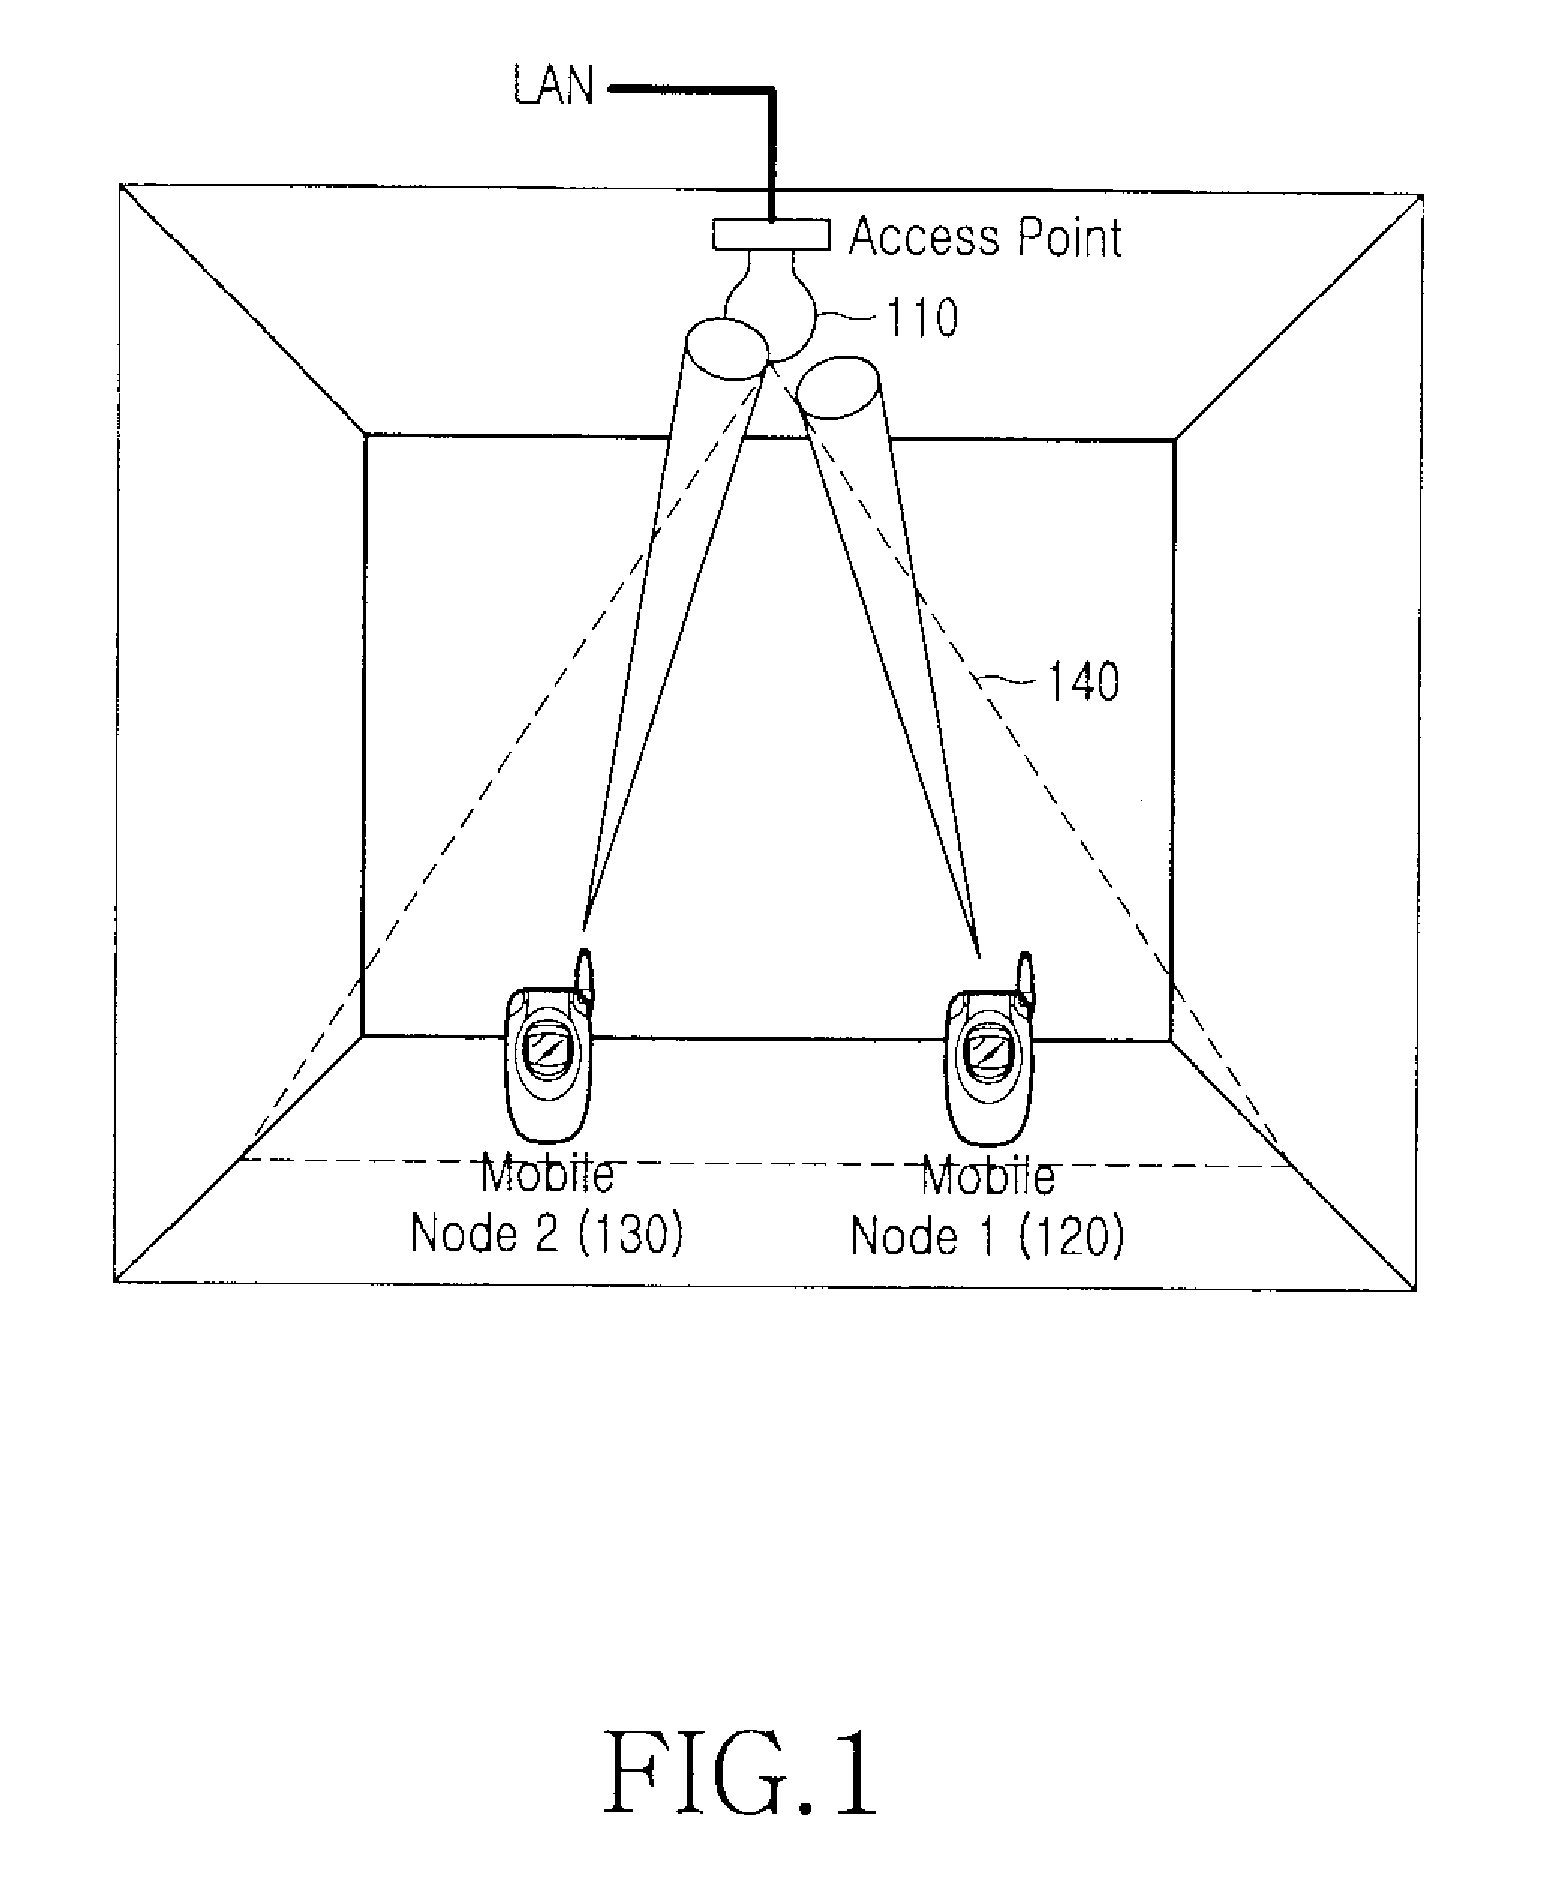 Method and apparatus for retransmitting data in wireless LAN system using visible light communication